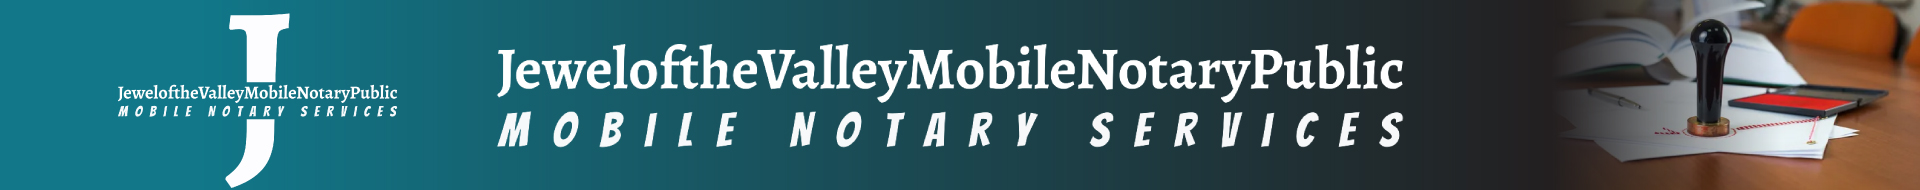 header - Jewel of the Valley Mobile Notary Public